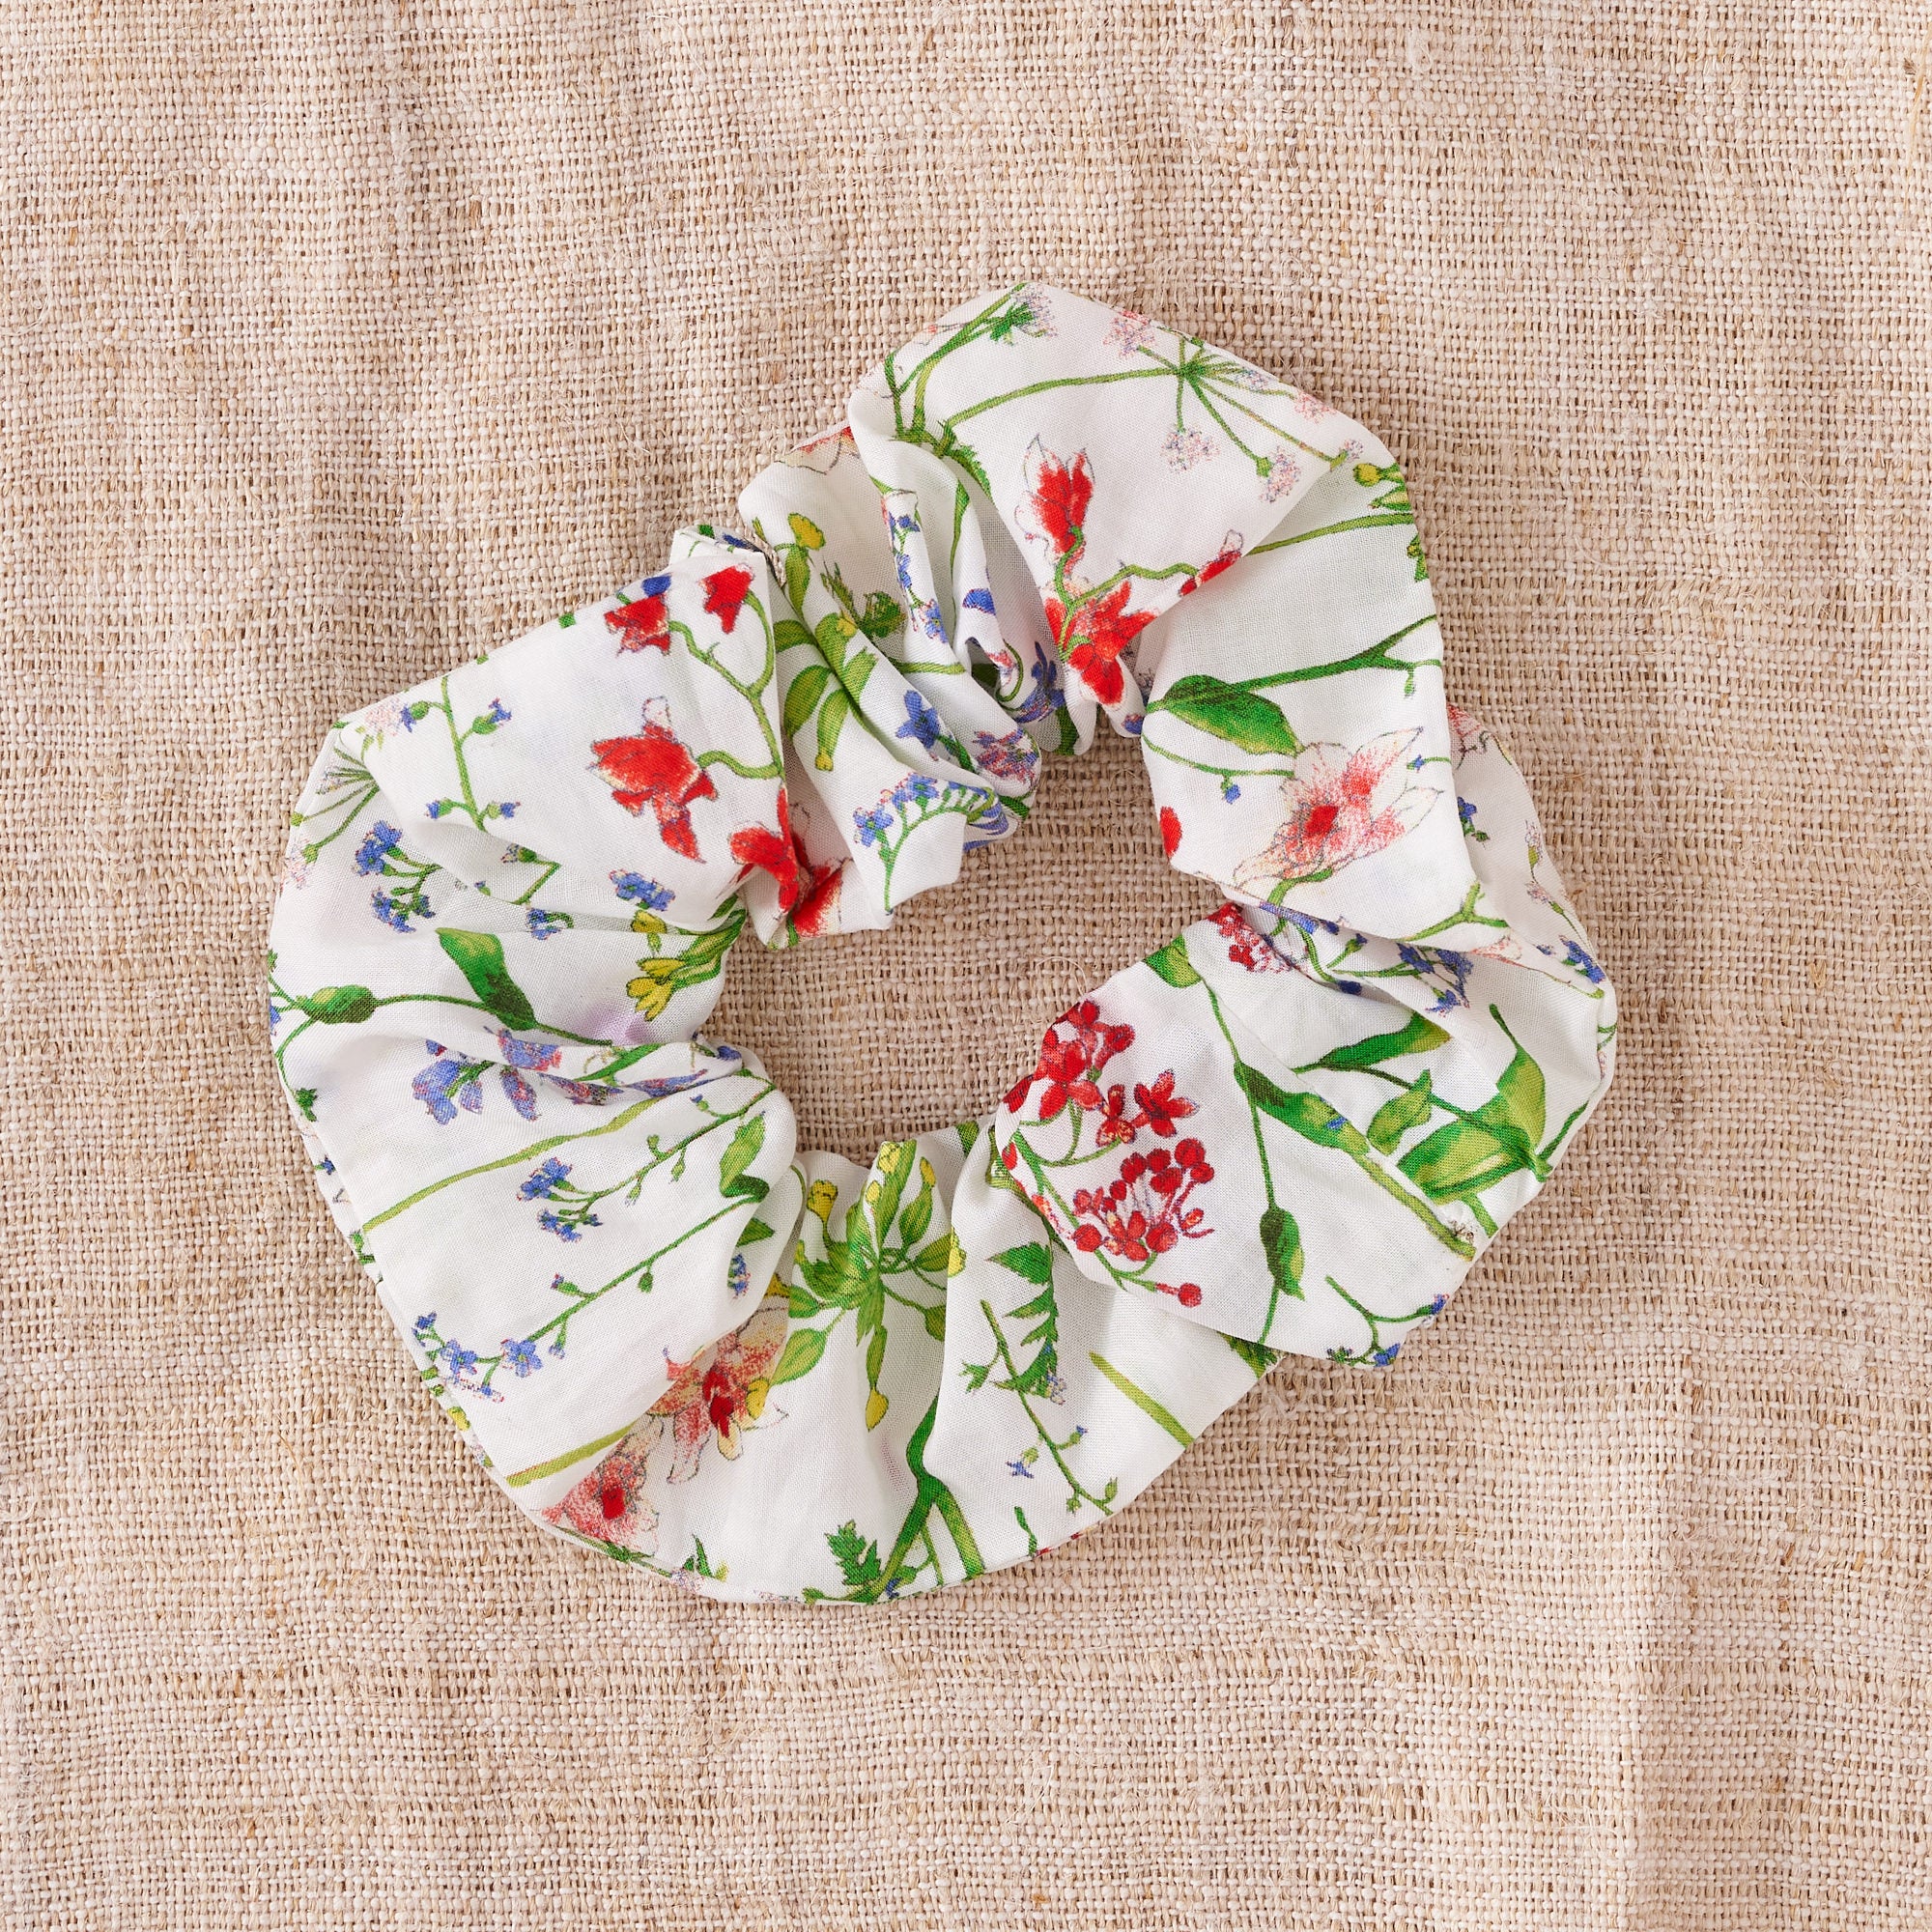 Liberty Print Tana Lawn Hair Scrunchie (21 different prints available)